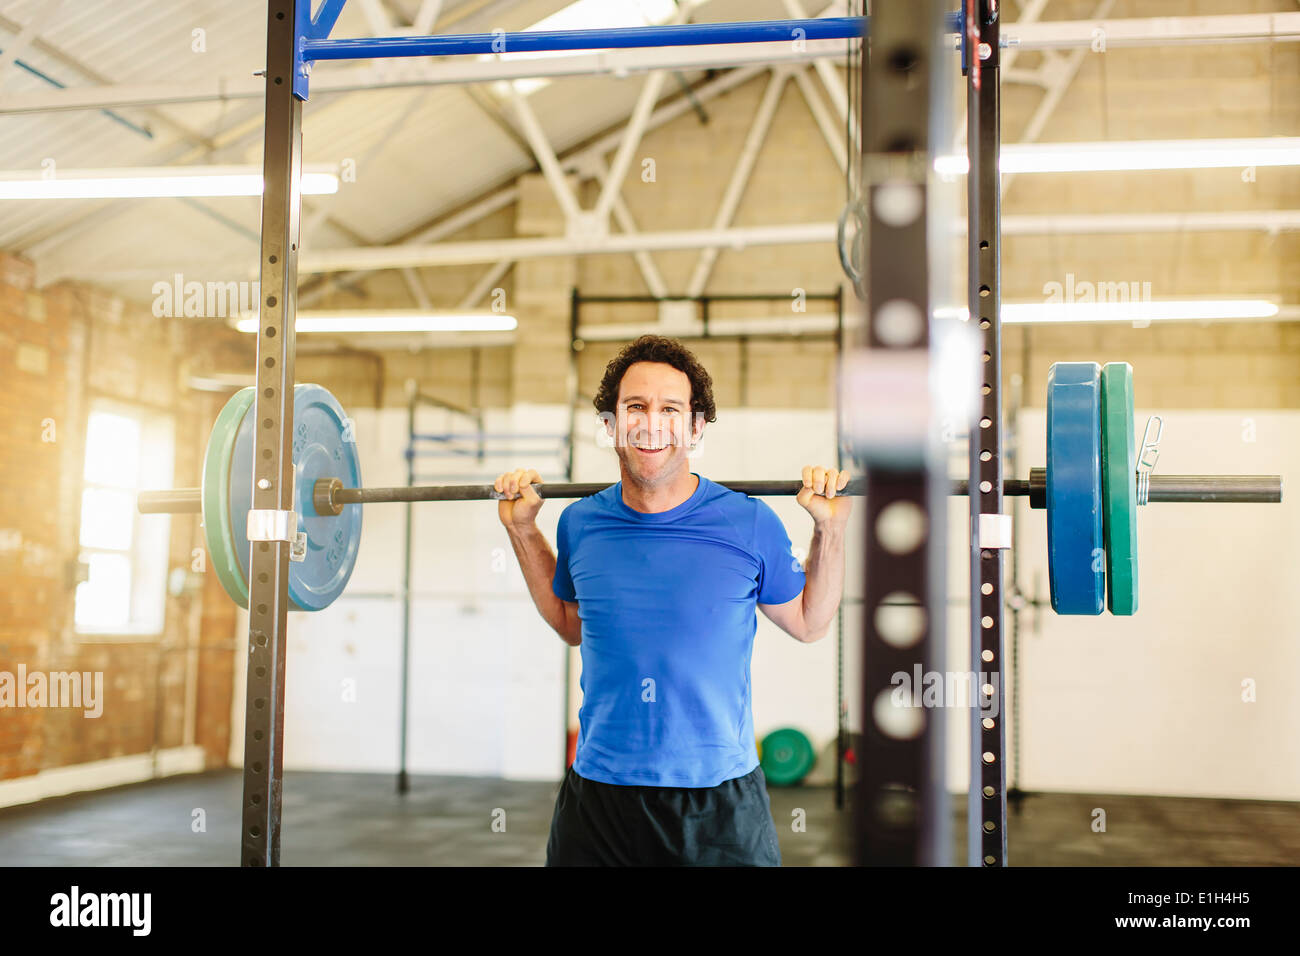 Man lifting barbell in gym Stock Photo